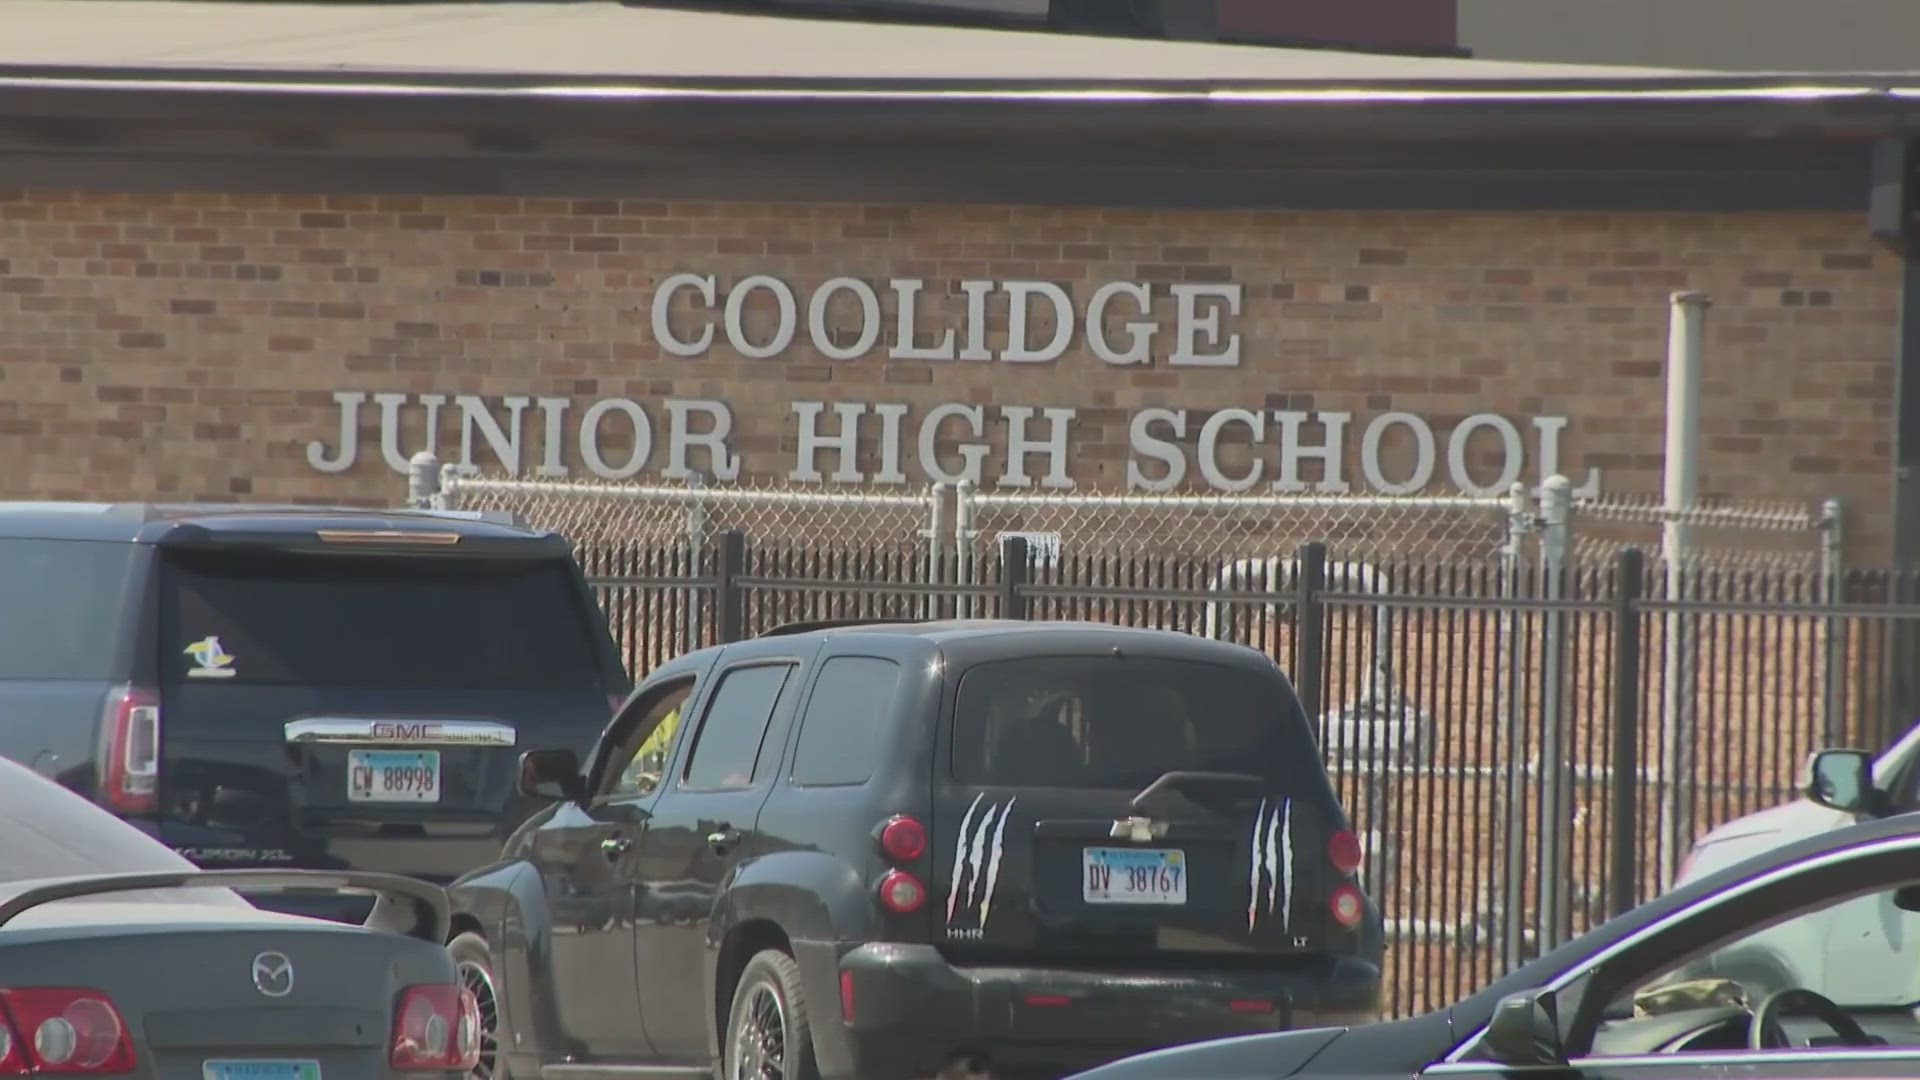 Granite City and Carbondale high schools were among those that reported receiving false shooting threats.